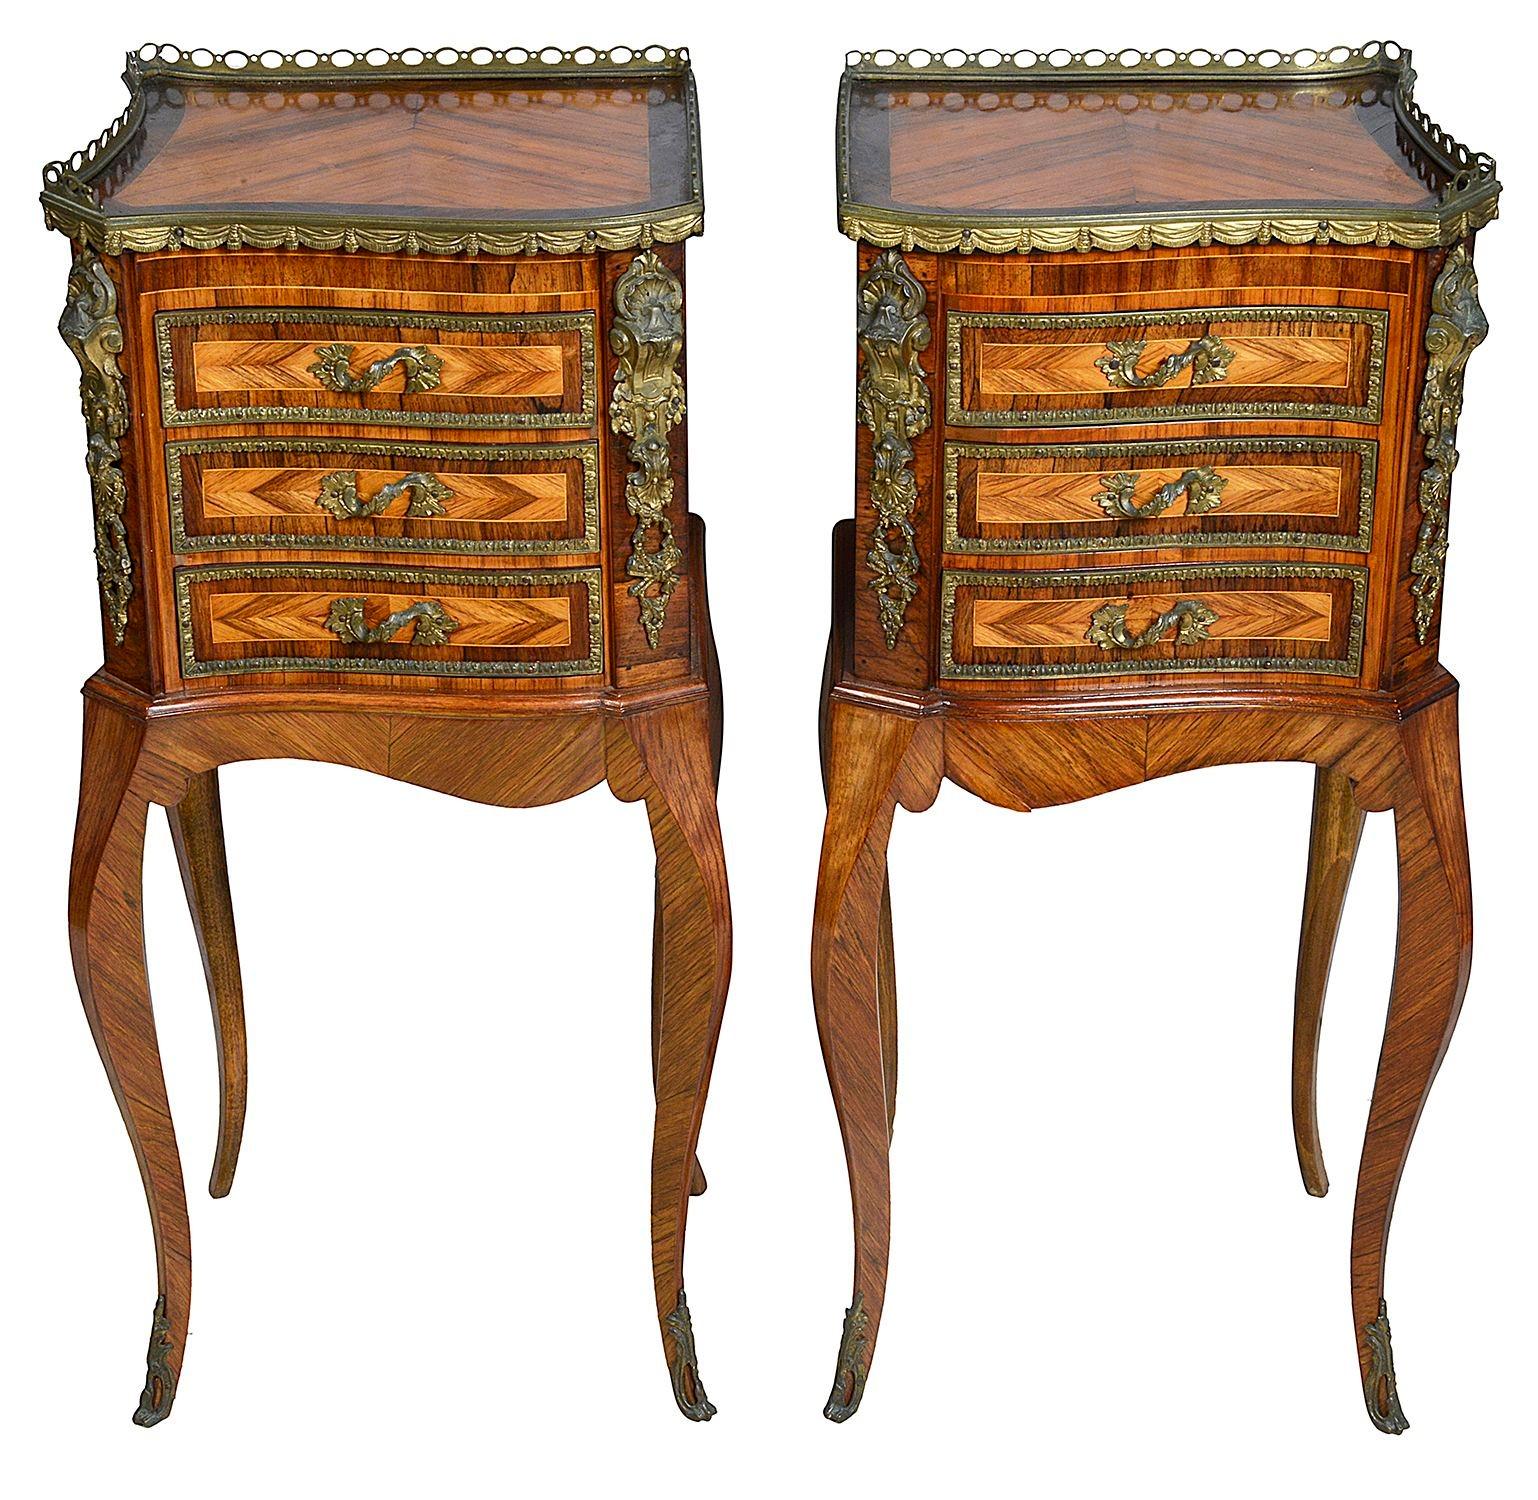 A good quality pair of late 19th Century French Louis XVI style Kingwood side cabinets. Each with gilded ormolu galleries, mounts and handles. Serpentine front and sides, three herringbone veneered drawers and raised on elegant cabriole legs.

Circa